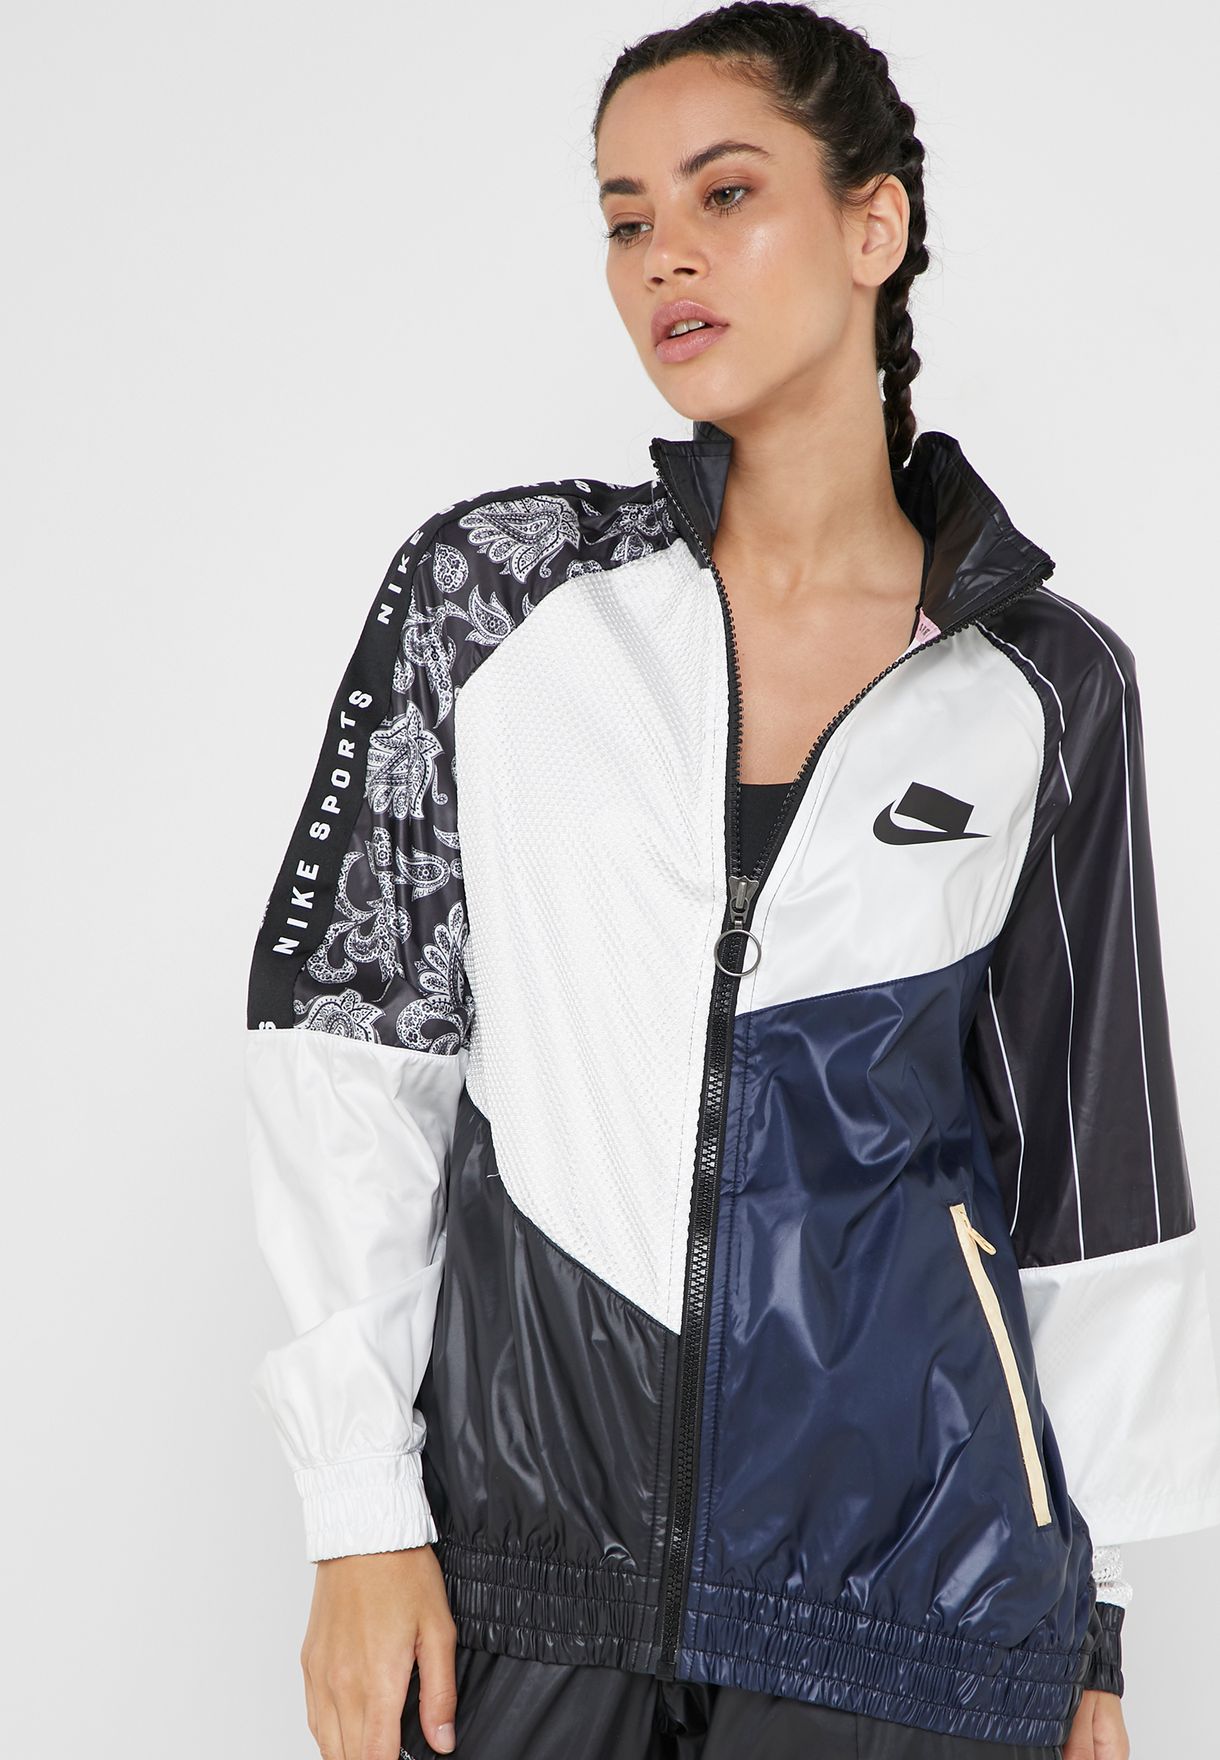 nike nsw woven tracksuit